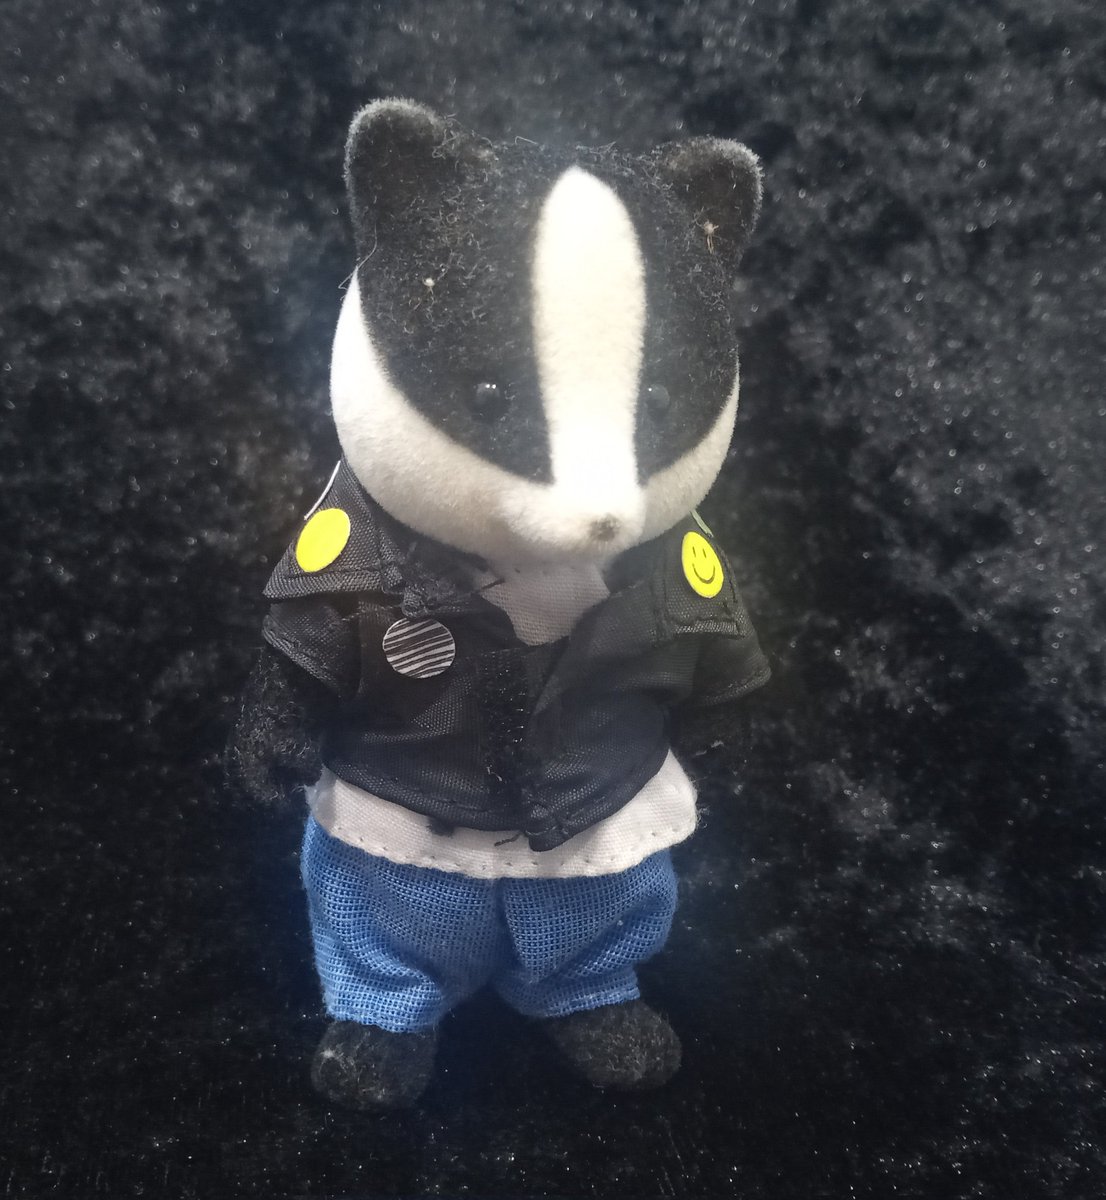 Hell Badger (decked in leather jacket with badges) hopes to see you tomorrow! See pinned post 🤘🦡
#CoolUniqueBadgesForCoolUniquePeople #hemelhempstead #craftfair #badger #sylvanianfamilies #RoyalAnnouncement #buttonbadges #craftfair